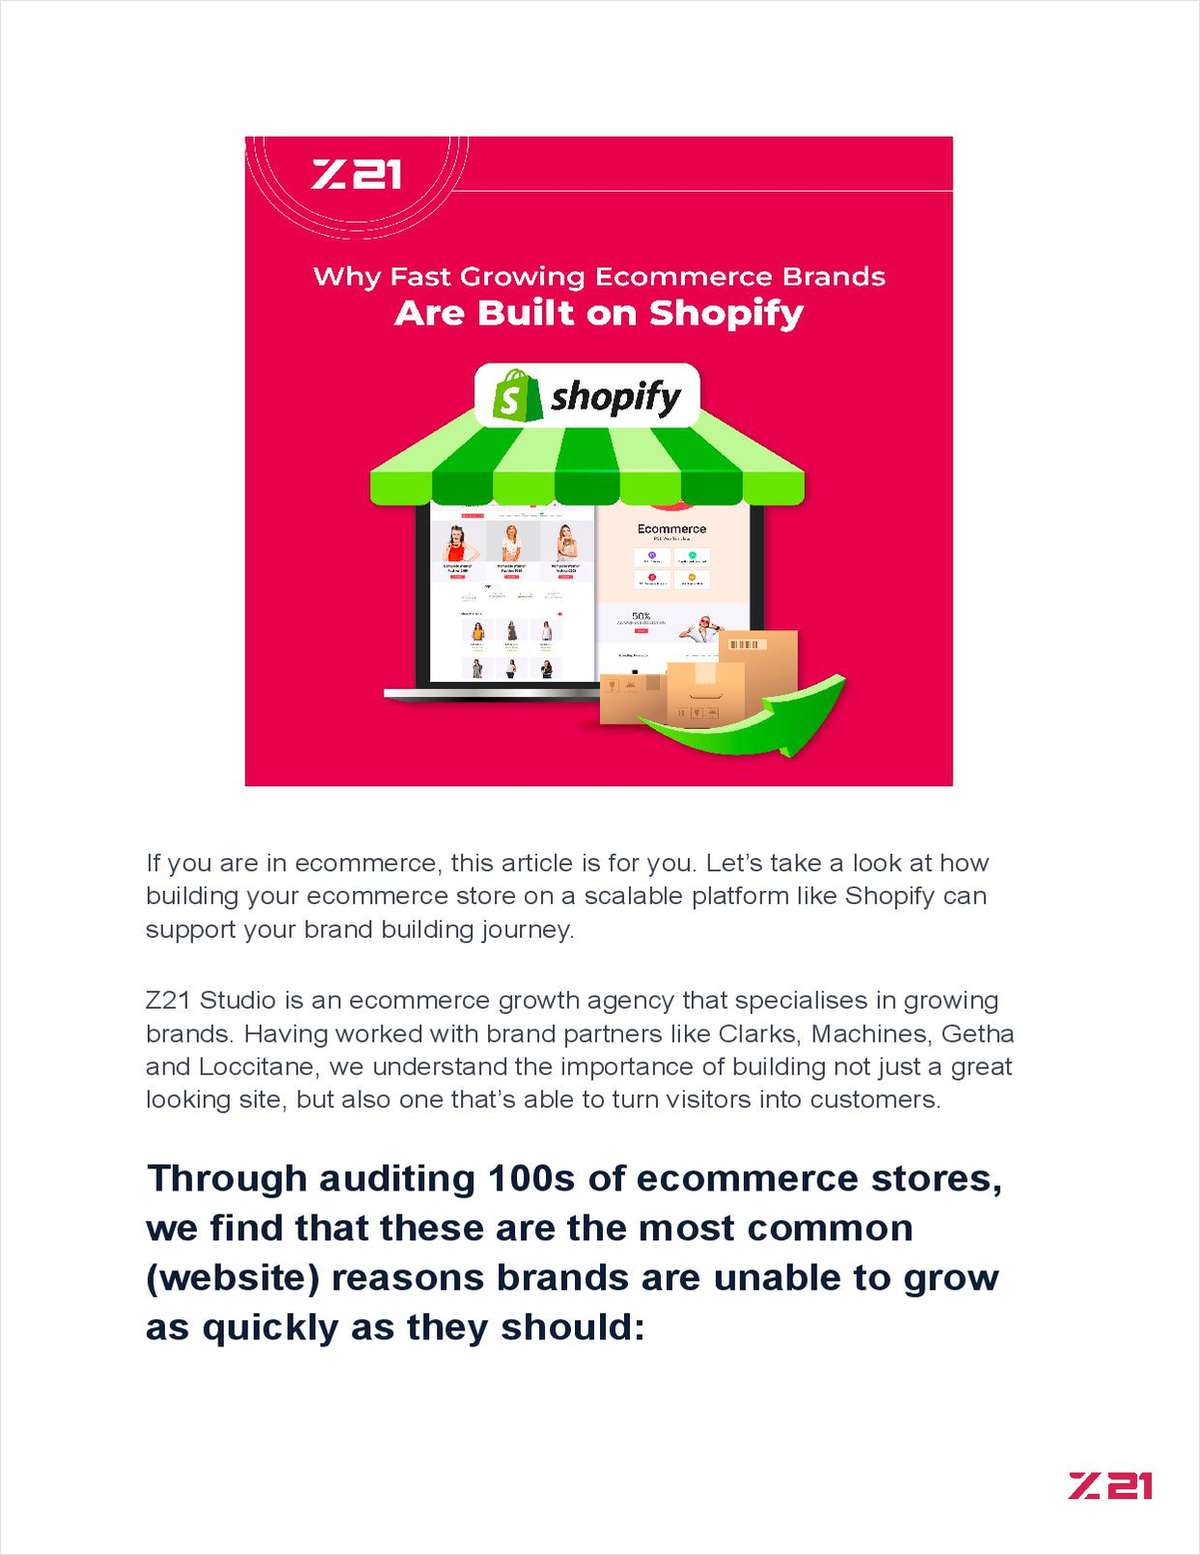 Why Fast Growing Ecommerce Brands Are Built on Shopify